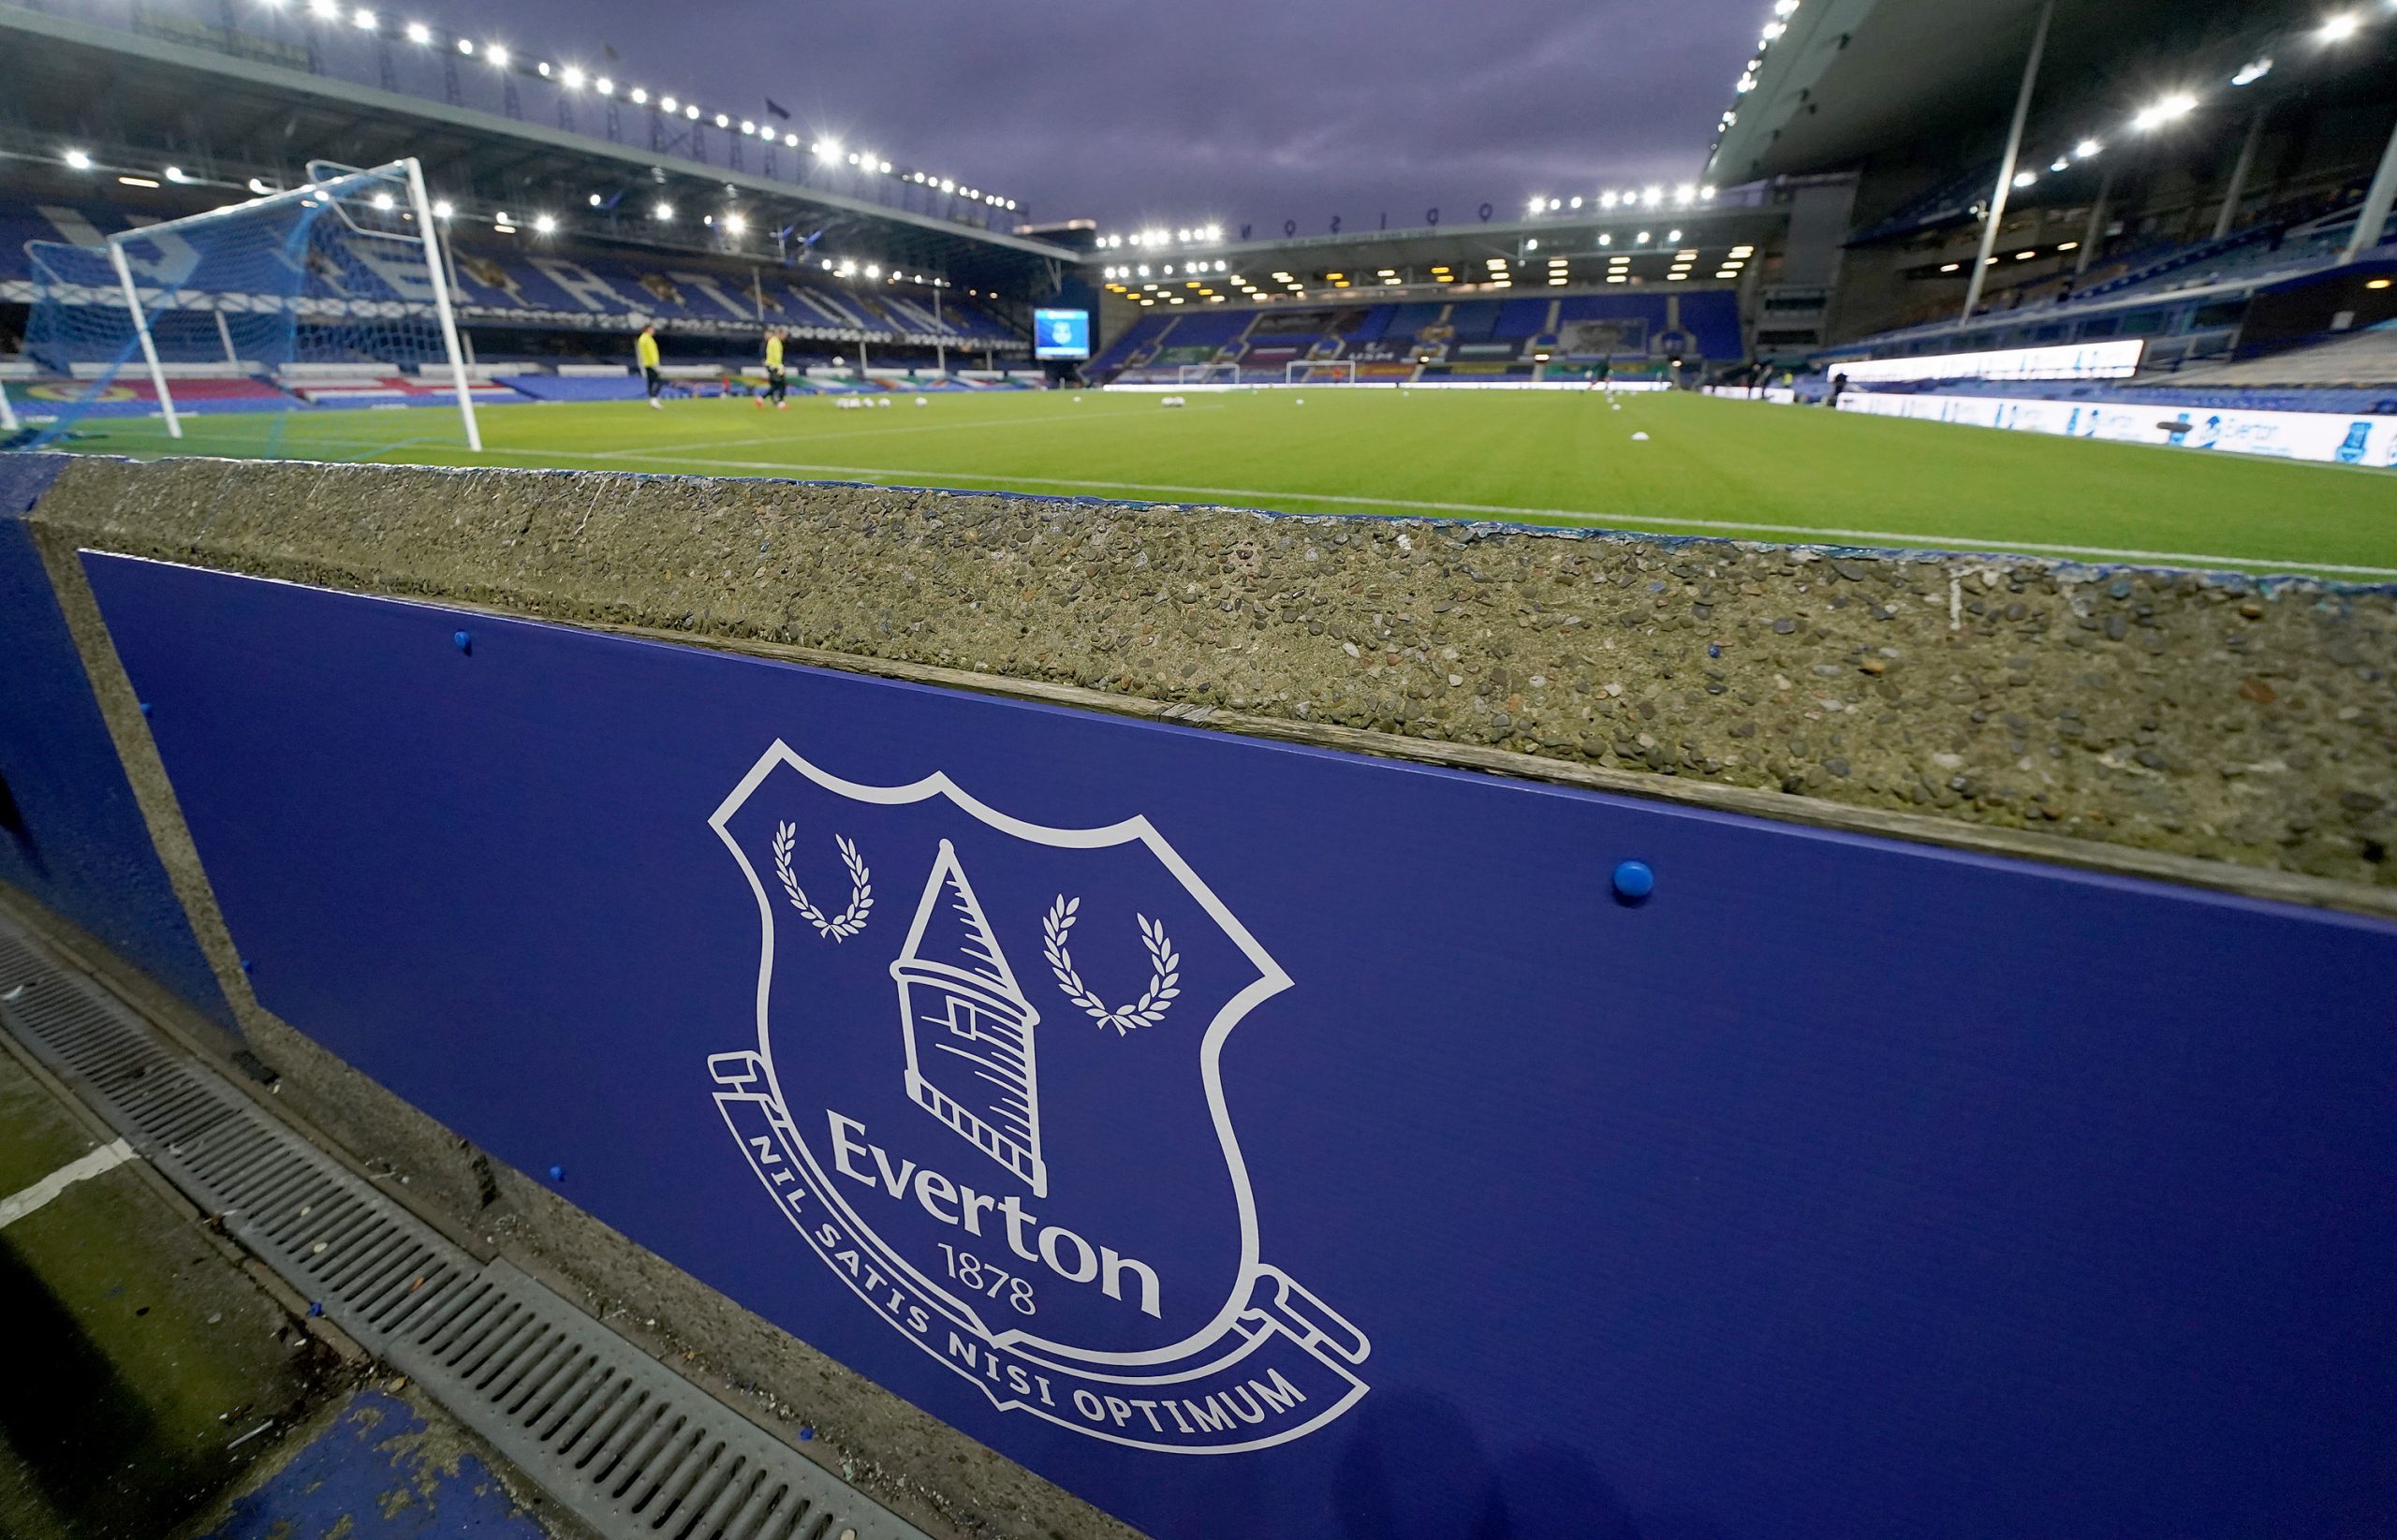 777 face pressure to finalise Everton takeover as crucial deadline looms